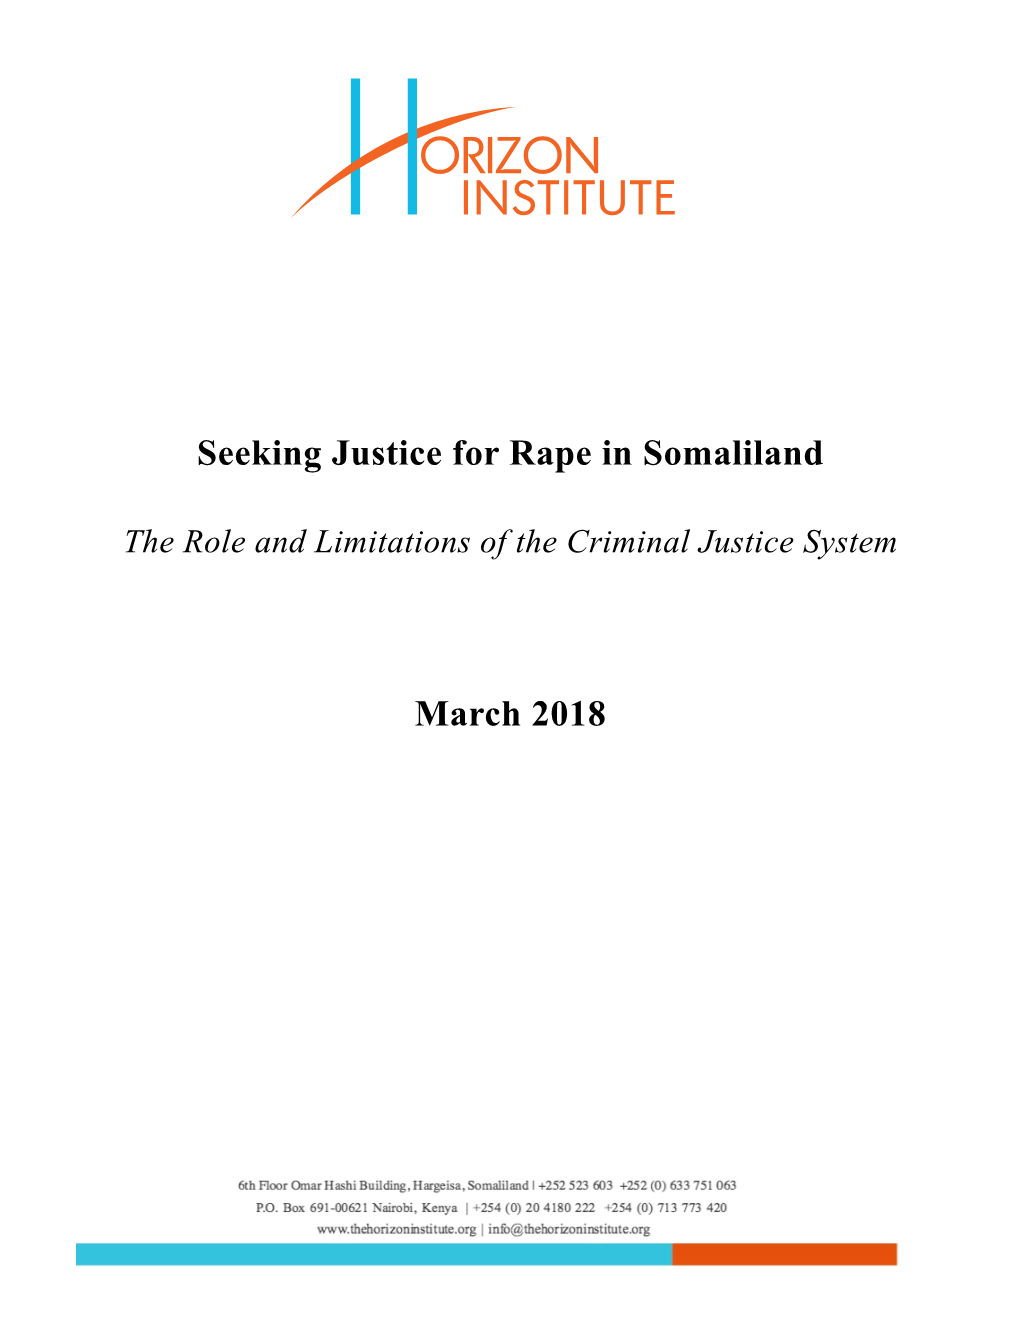 Seeking Justice for Rape in Somaliland